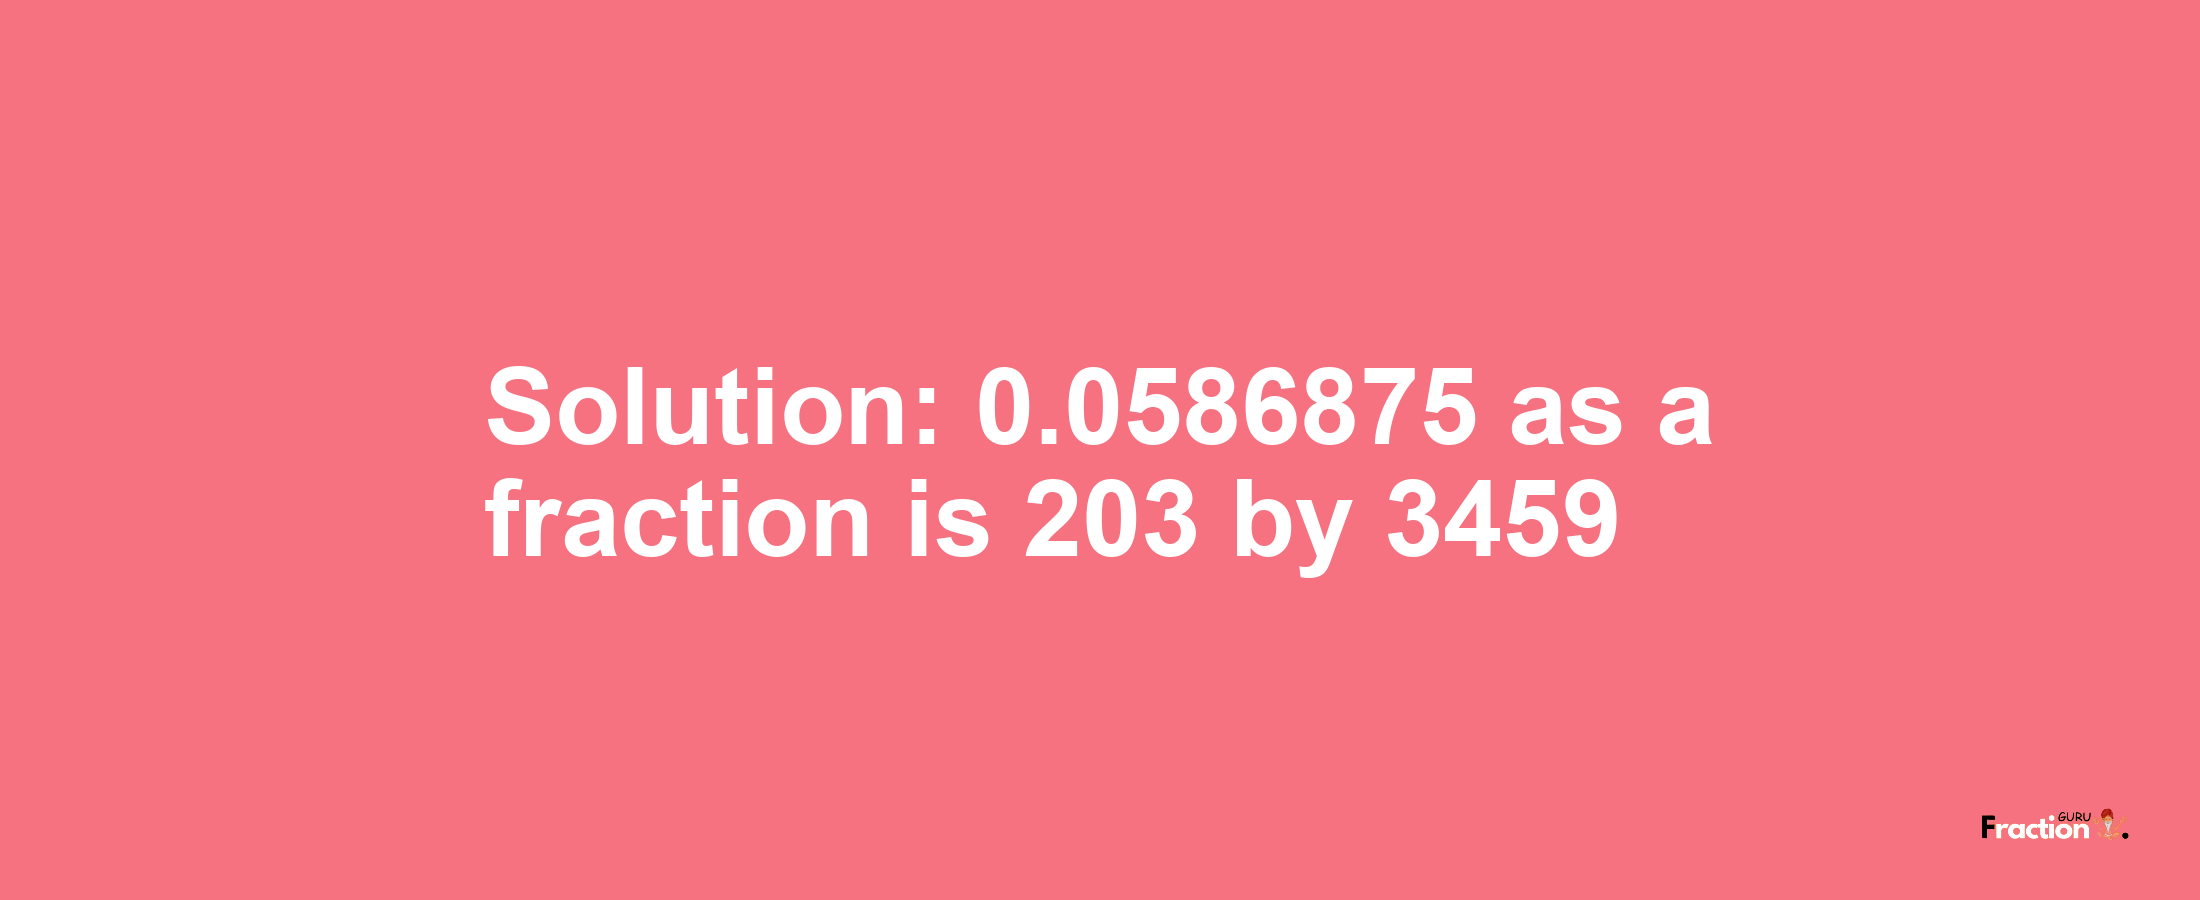 Solution:0.0586875 as a fraction is 203/3459